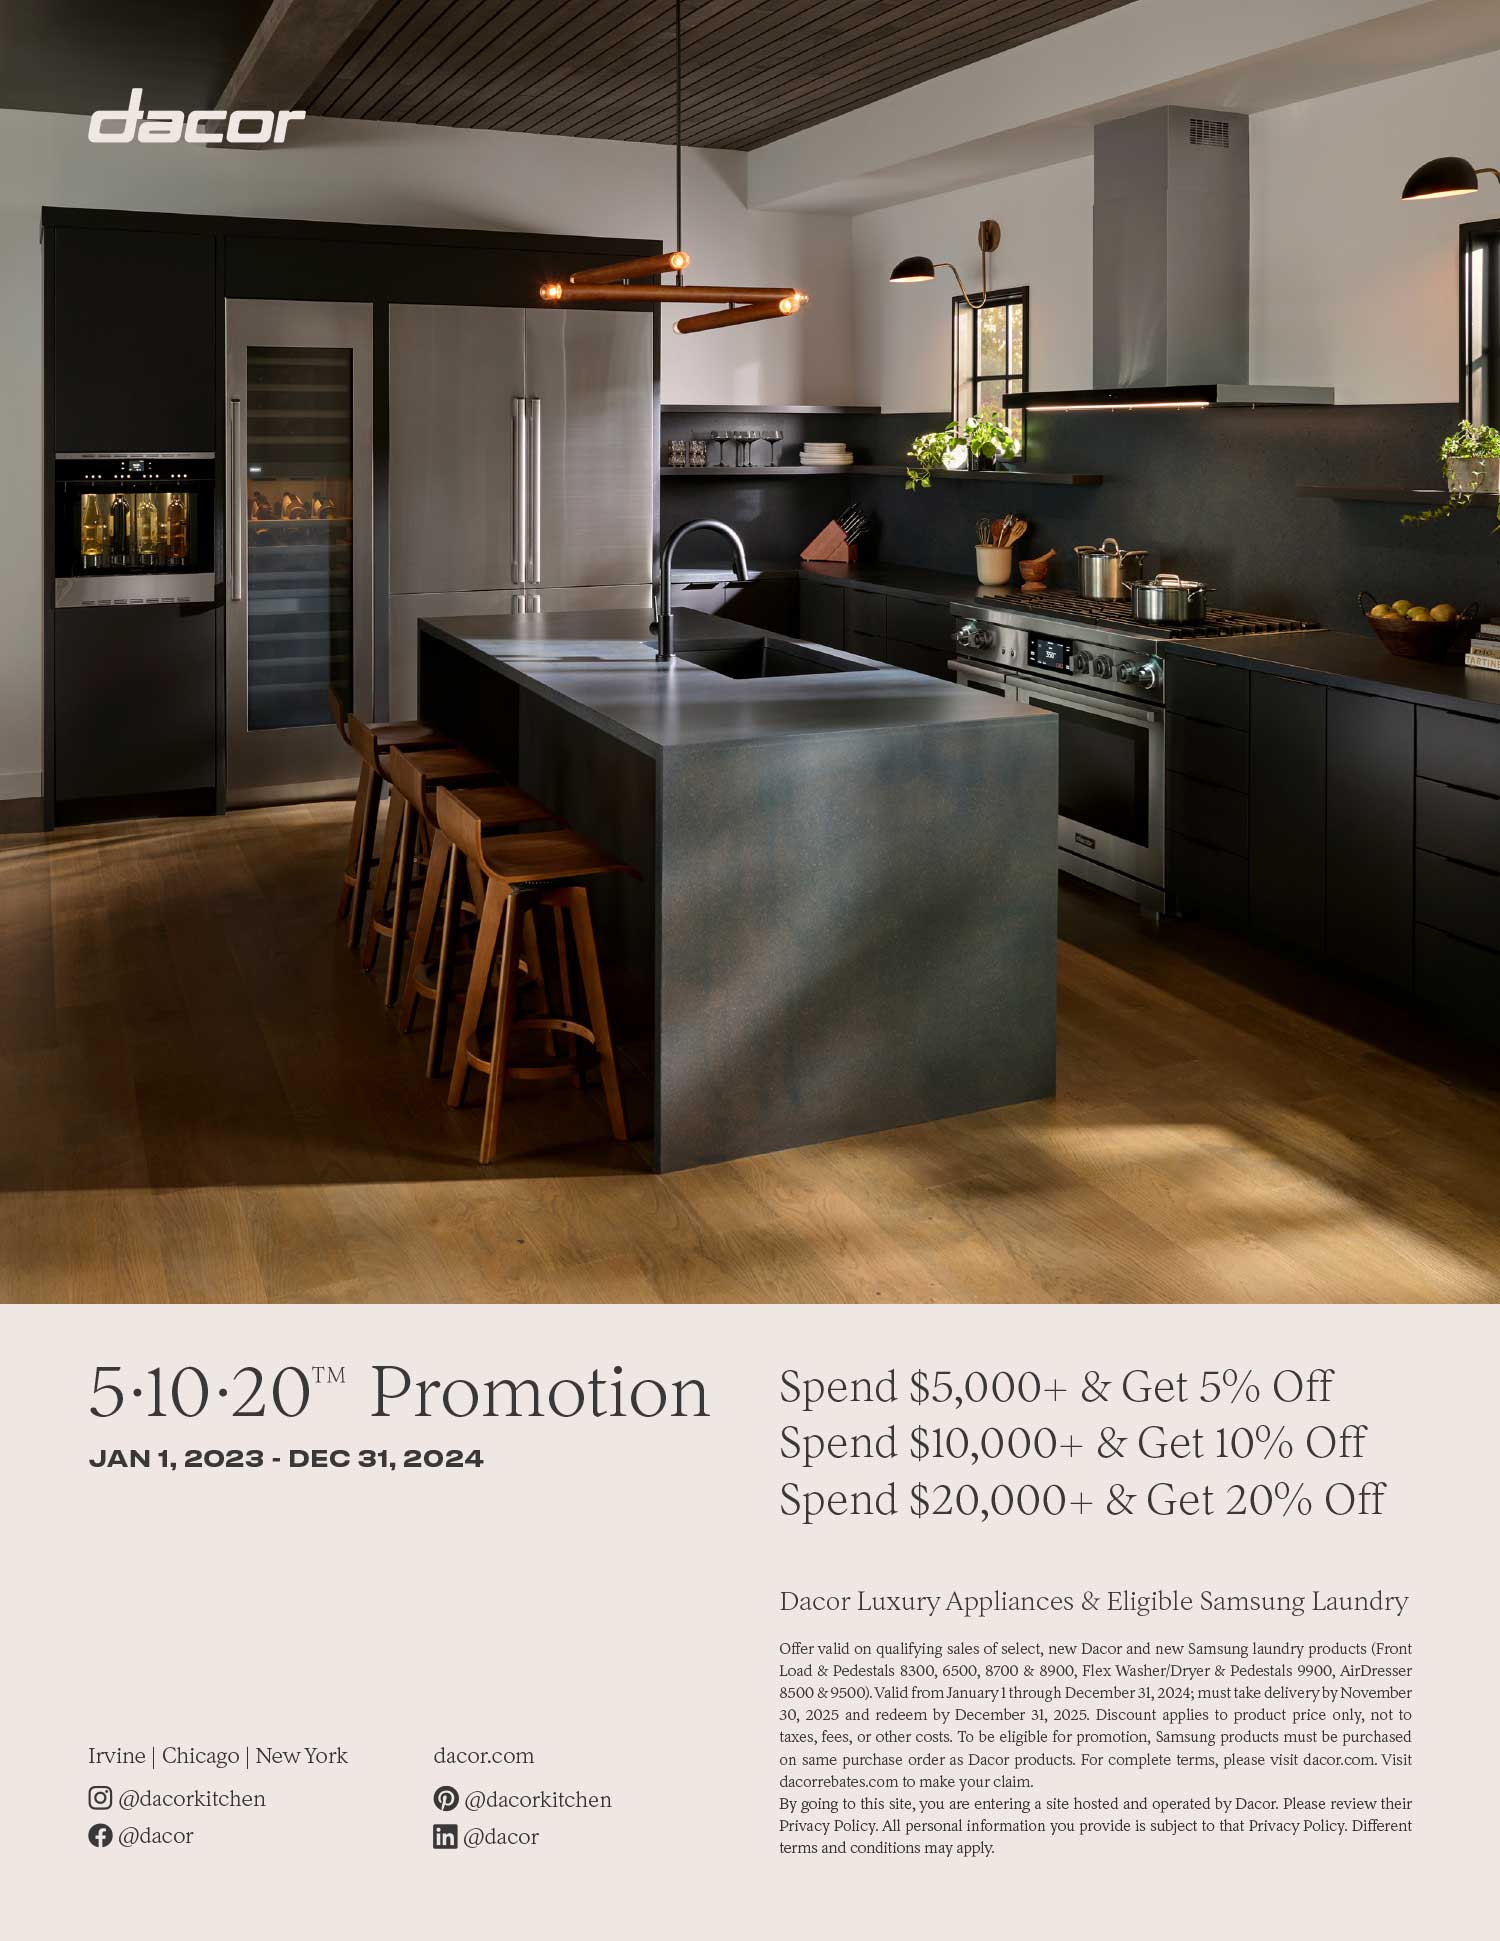 Dacor 5-10-20 Promotion - Save up to 20%